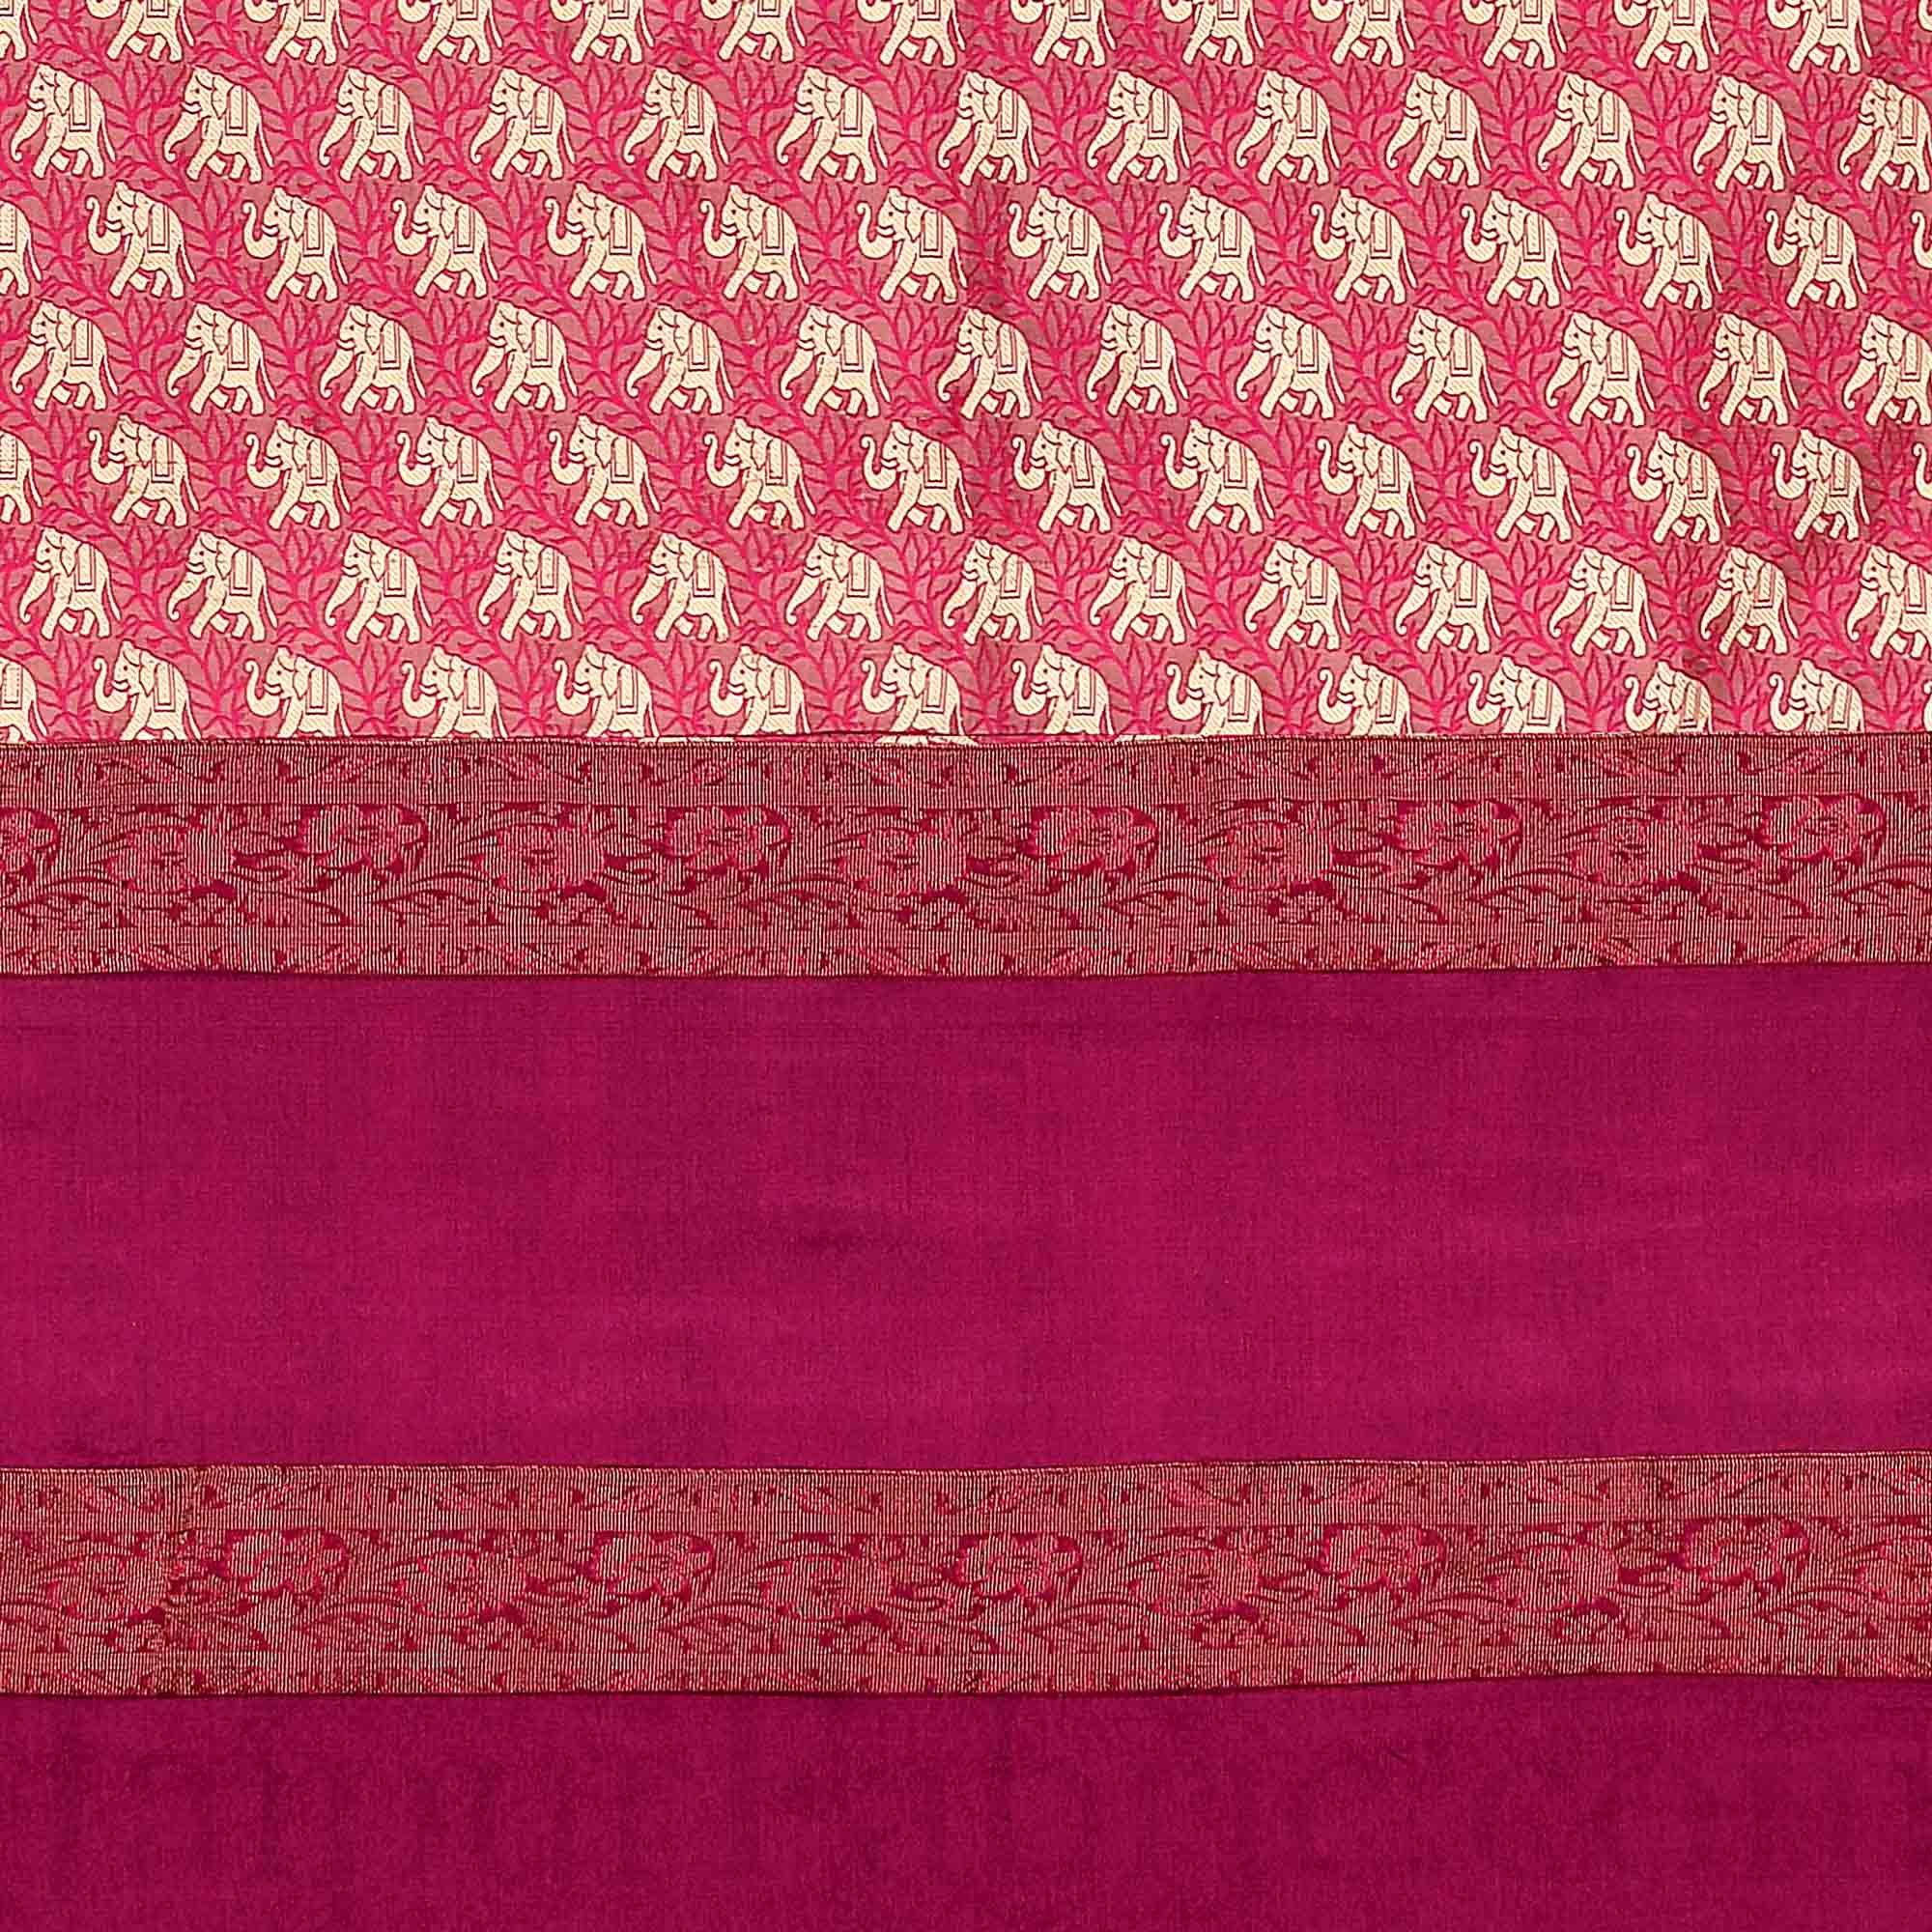 Maroon Rajasthani Zari Embroidered Lace Work Silk Double Bed Sheet